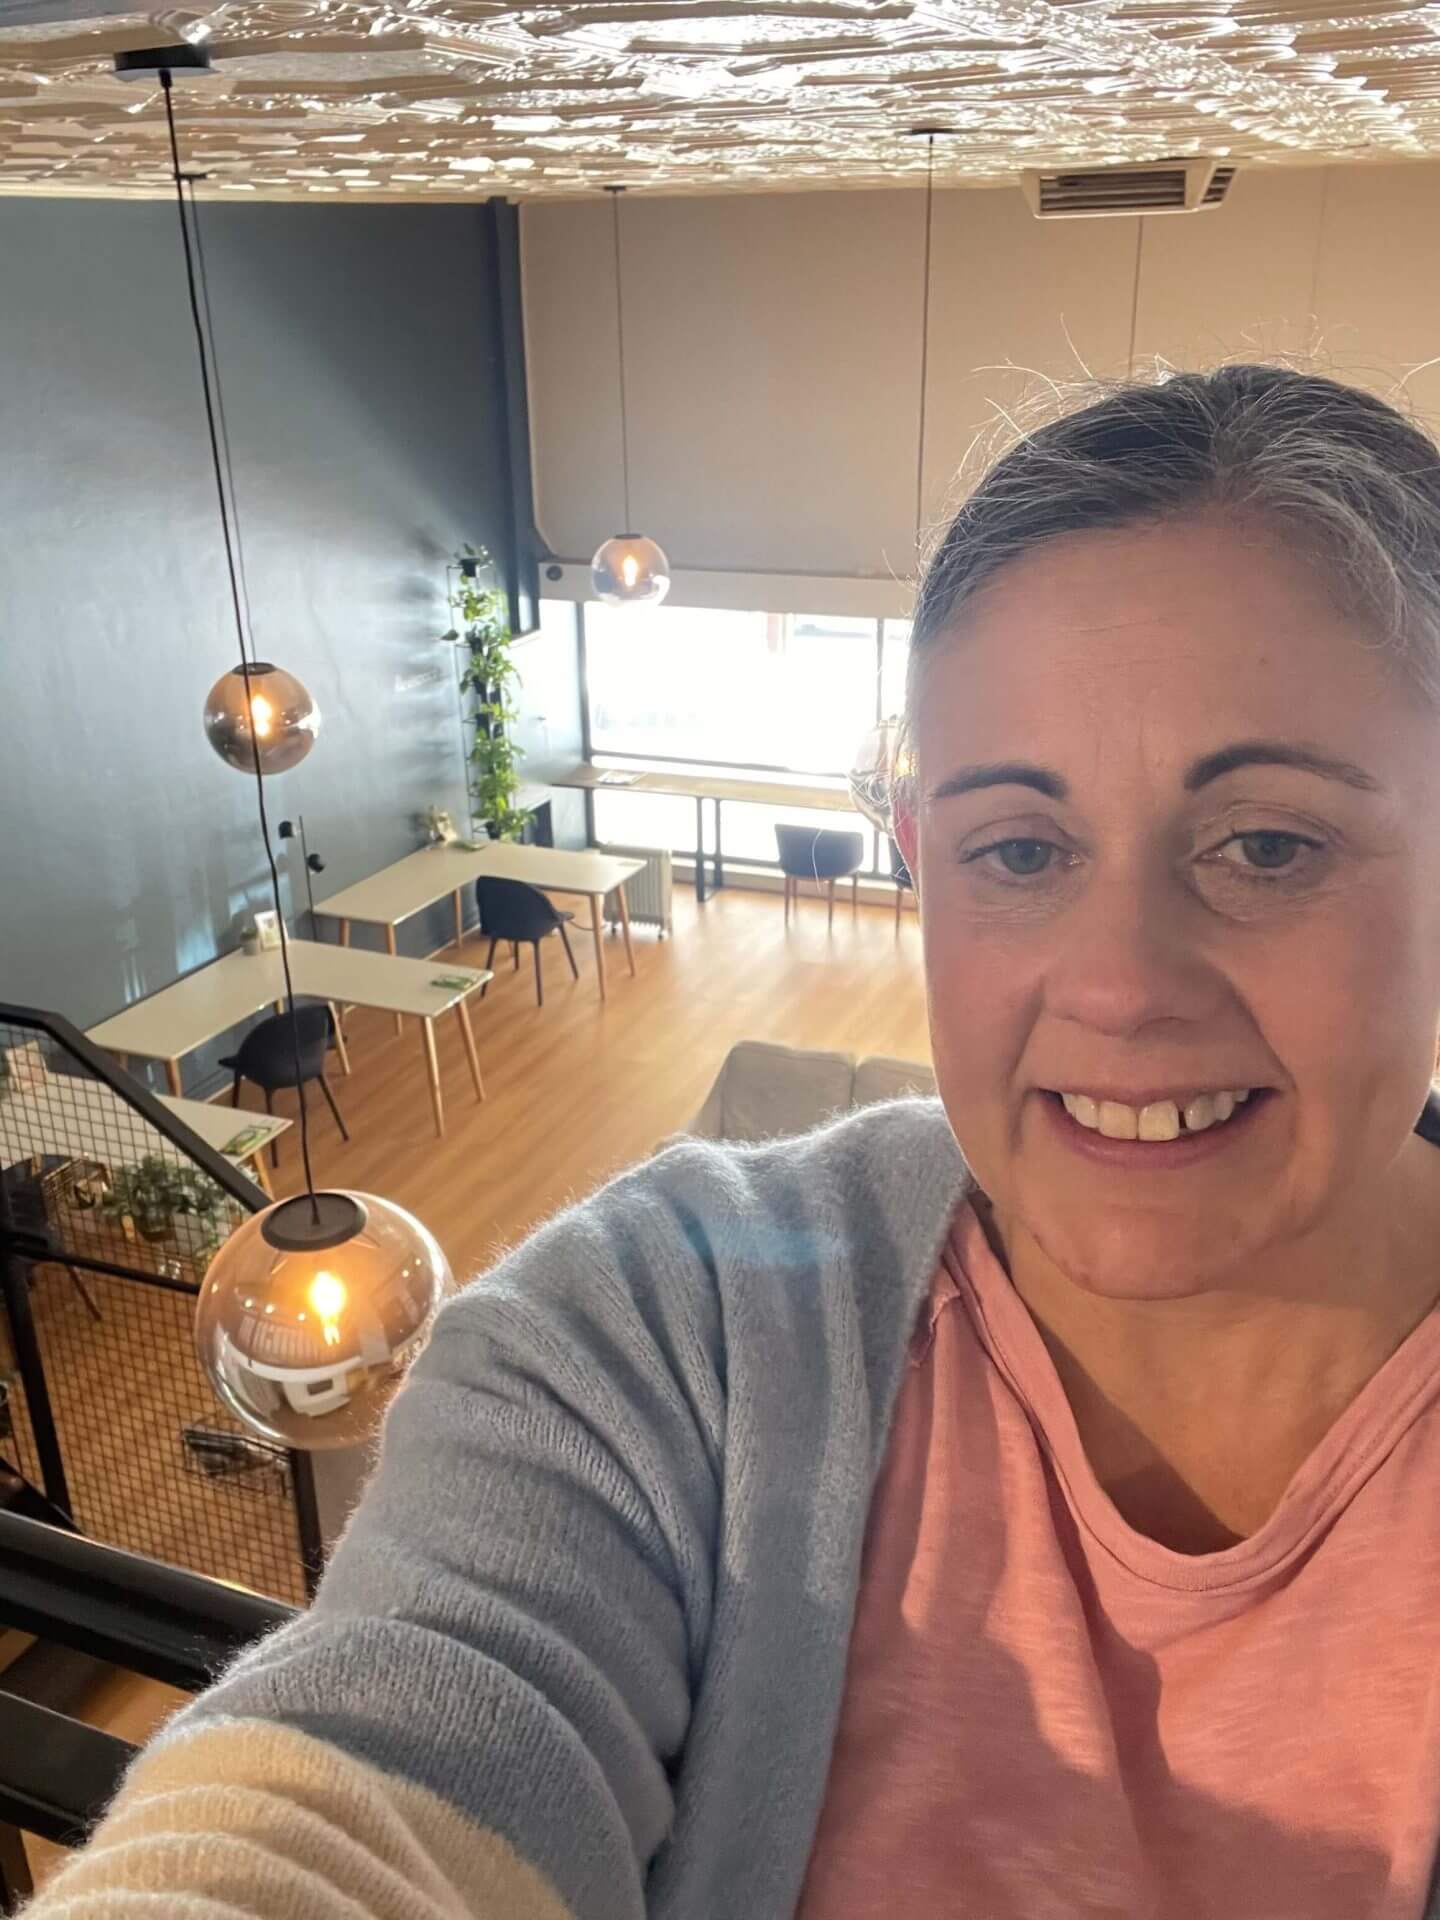 Angela is taking a selfie at the coworking space